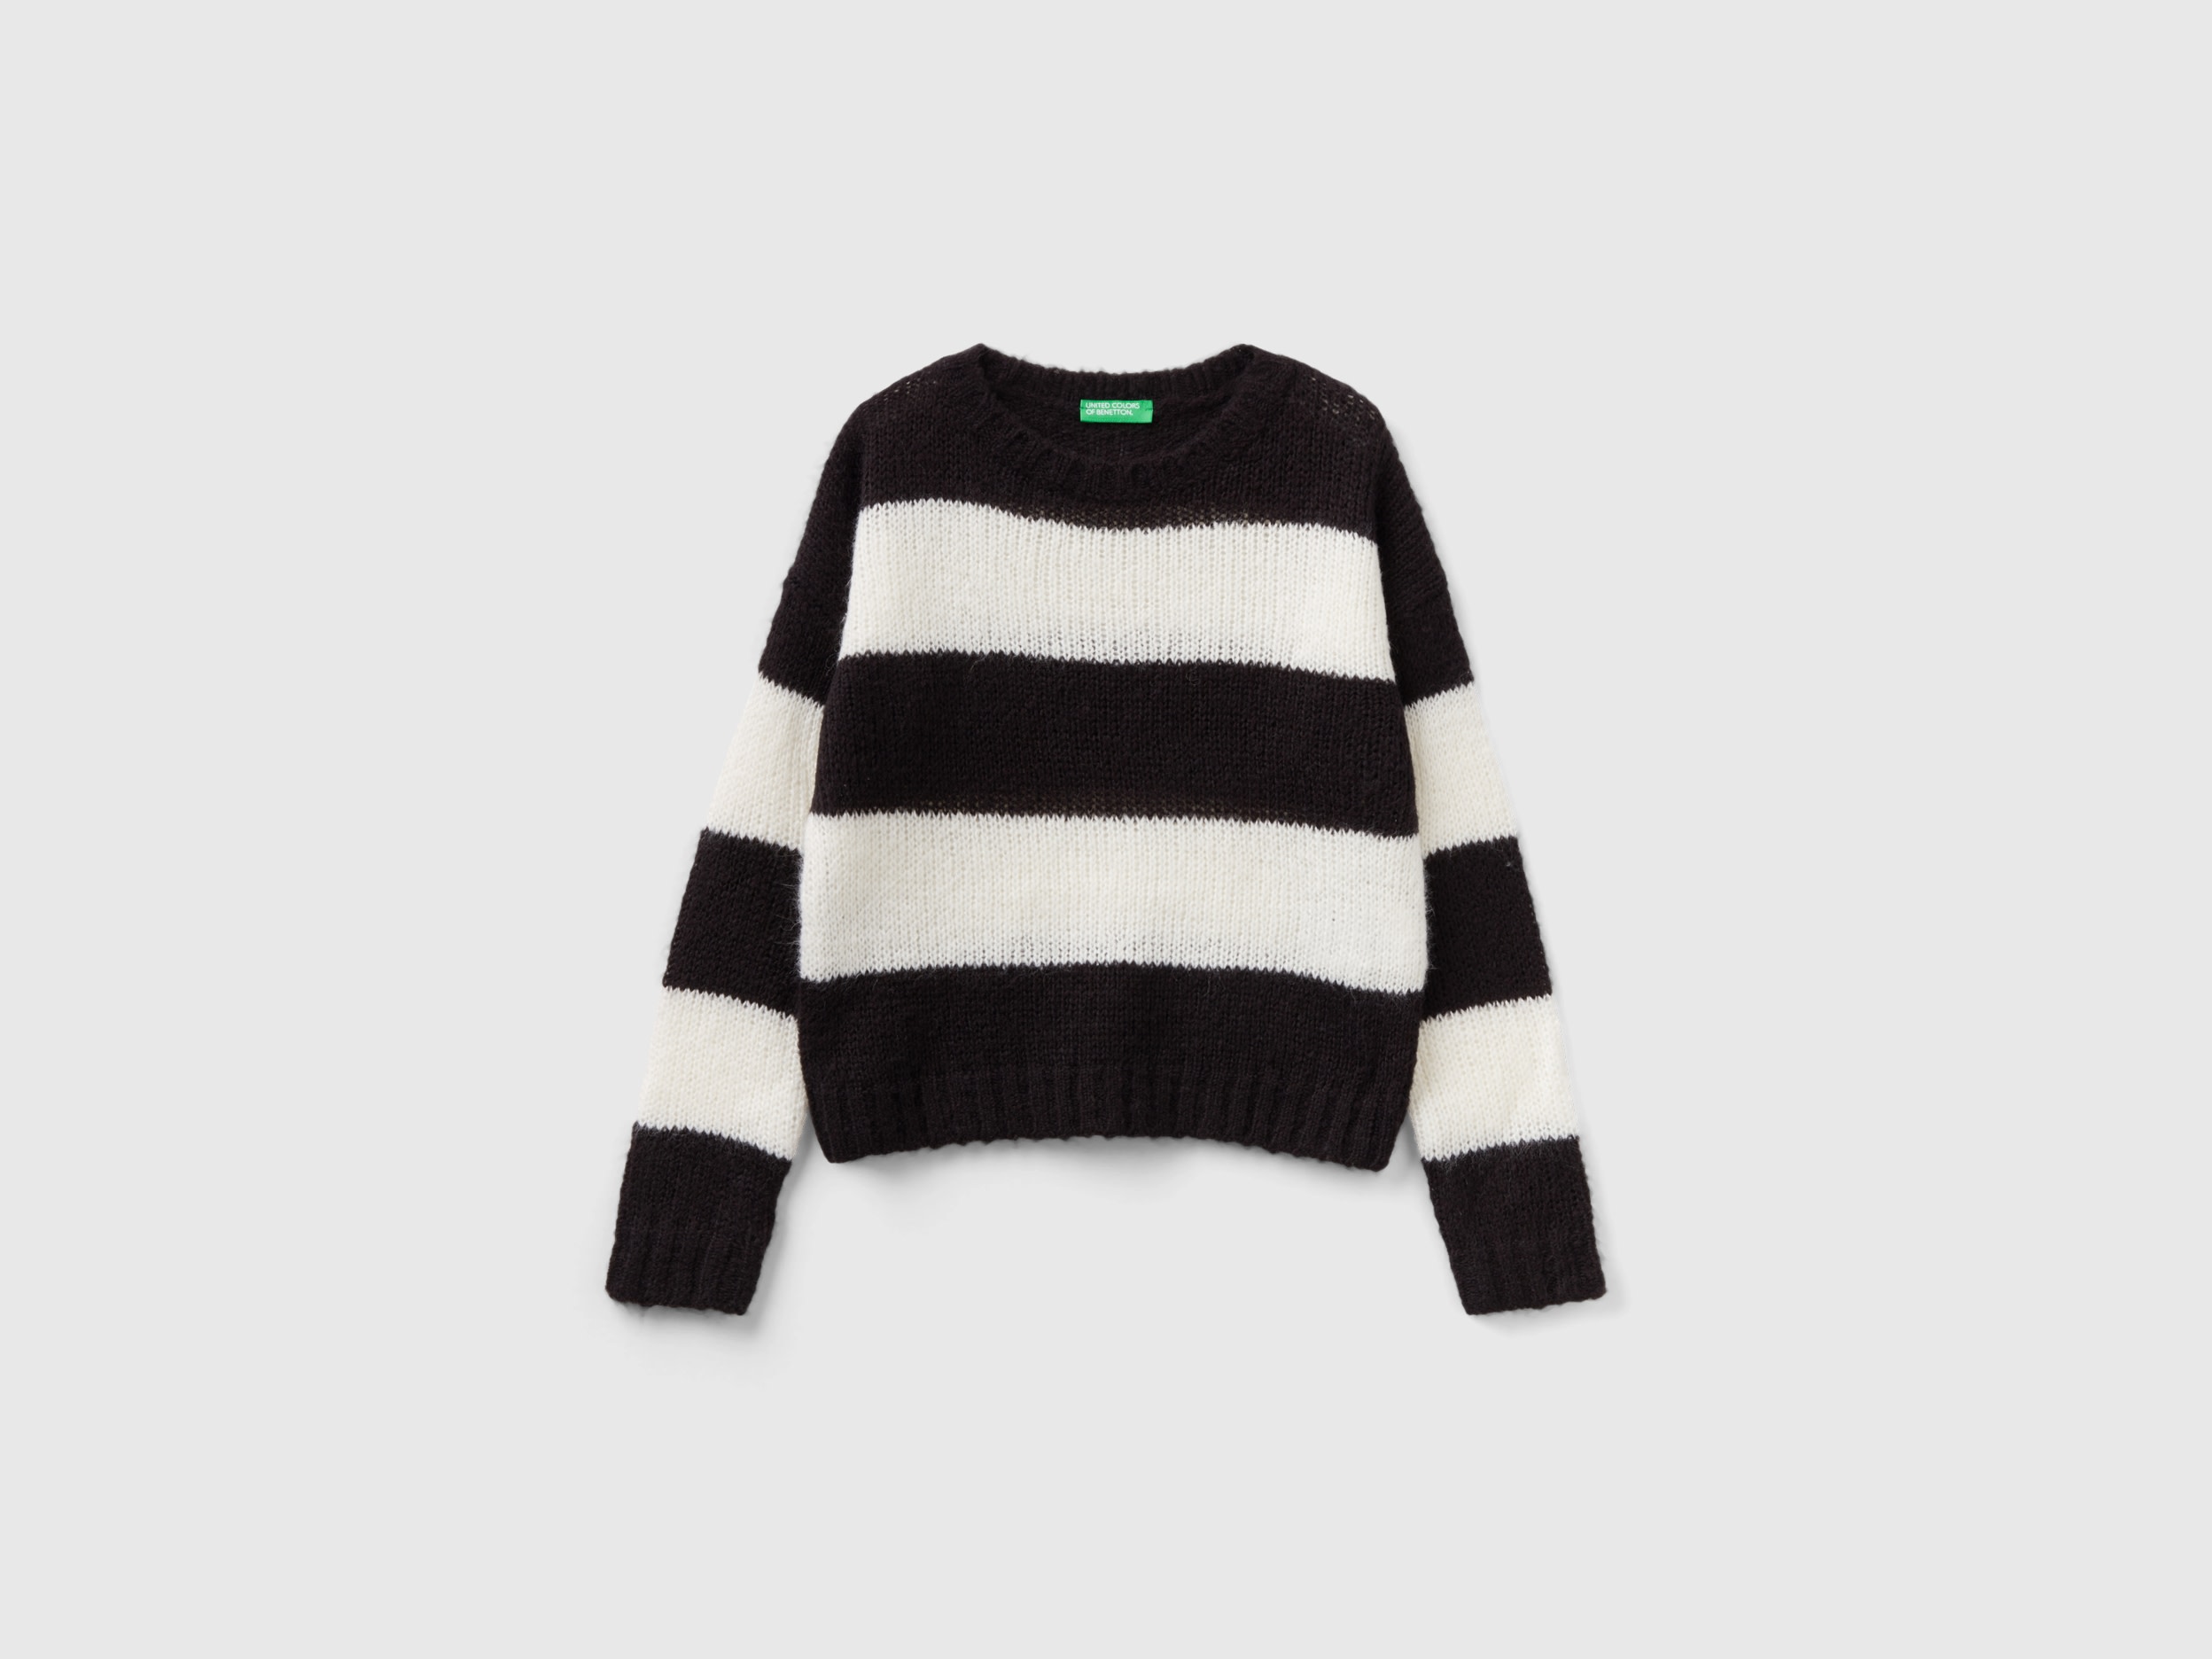 Benetton, Sweater With Two-tone Stripes, size S, Black, Kids